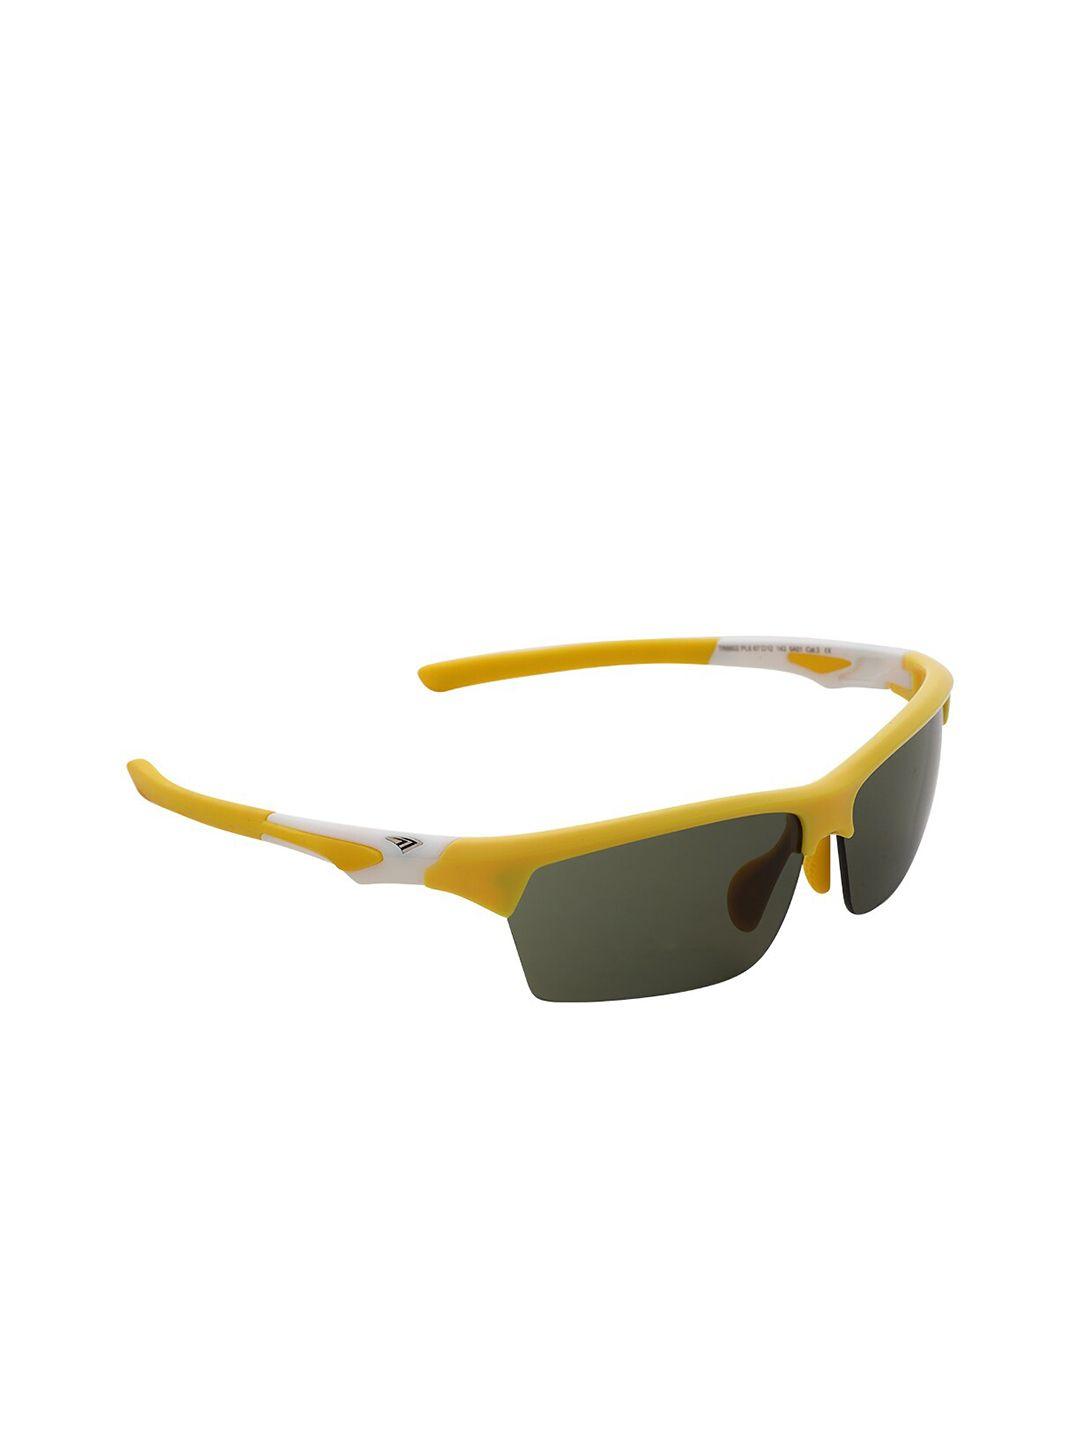 charles london men grey lens & yellow sports sunglasses with uv protected lens